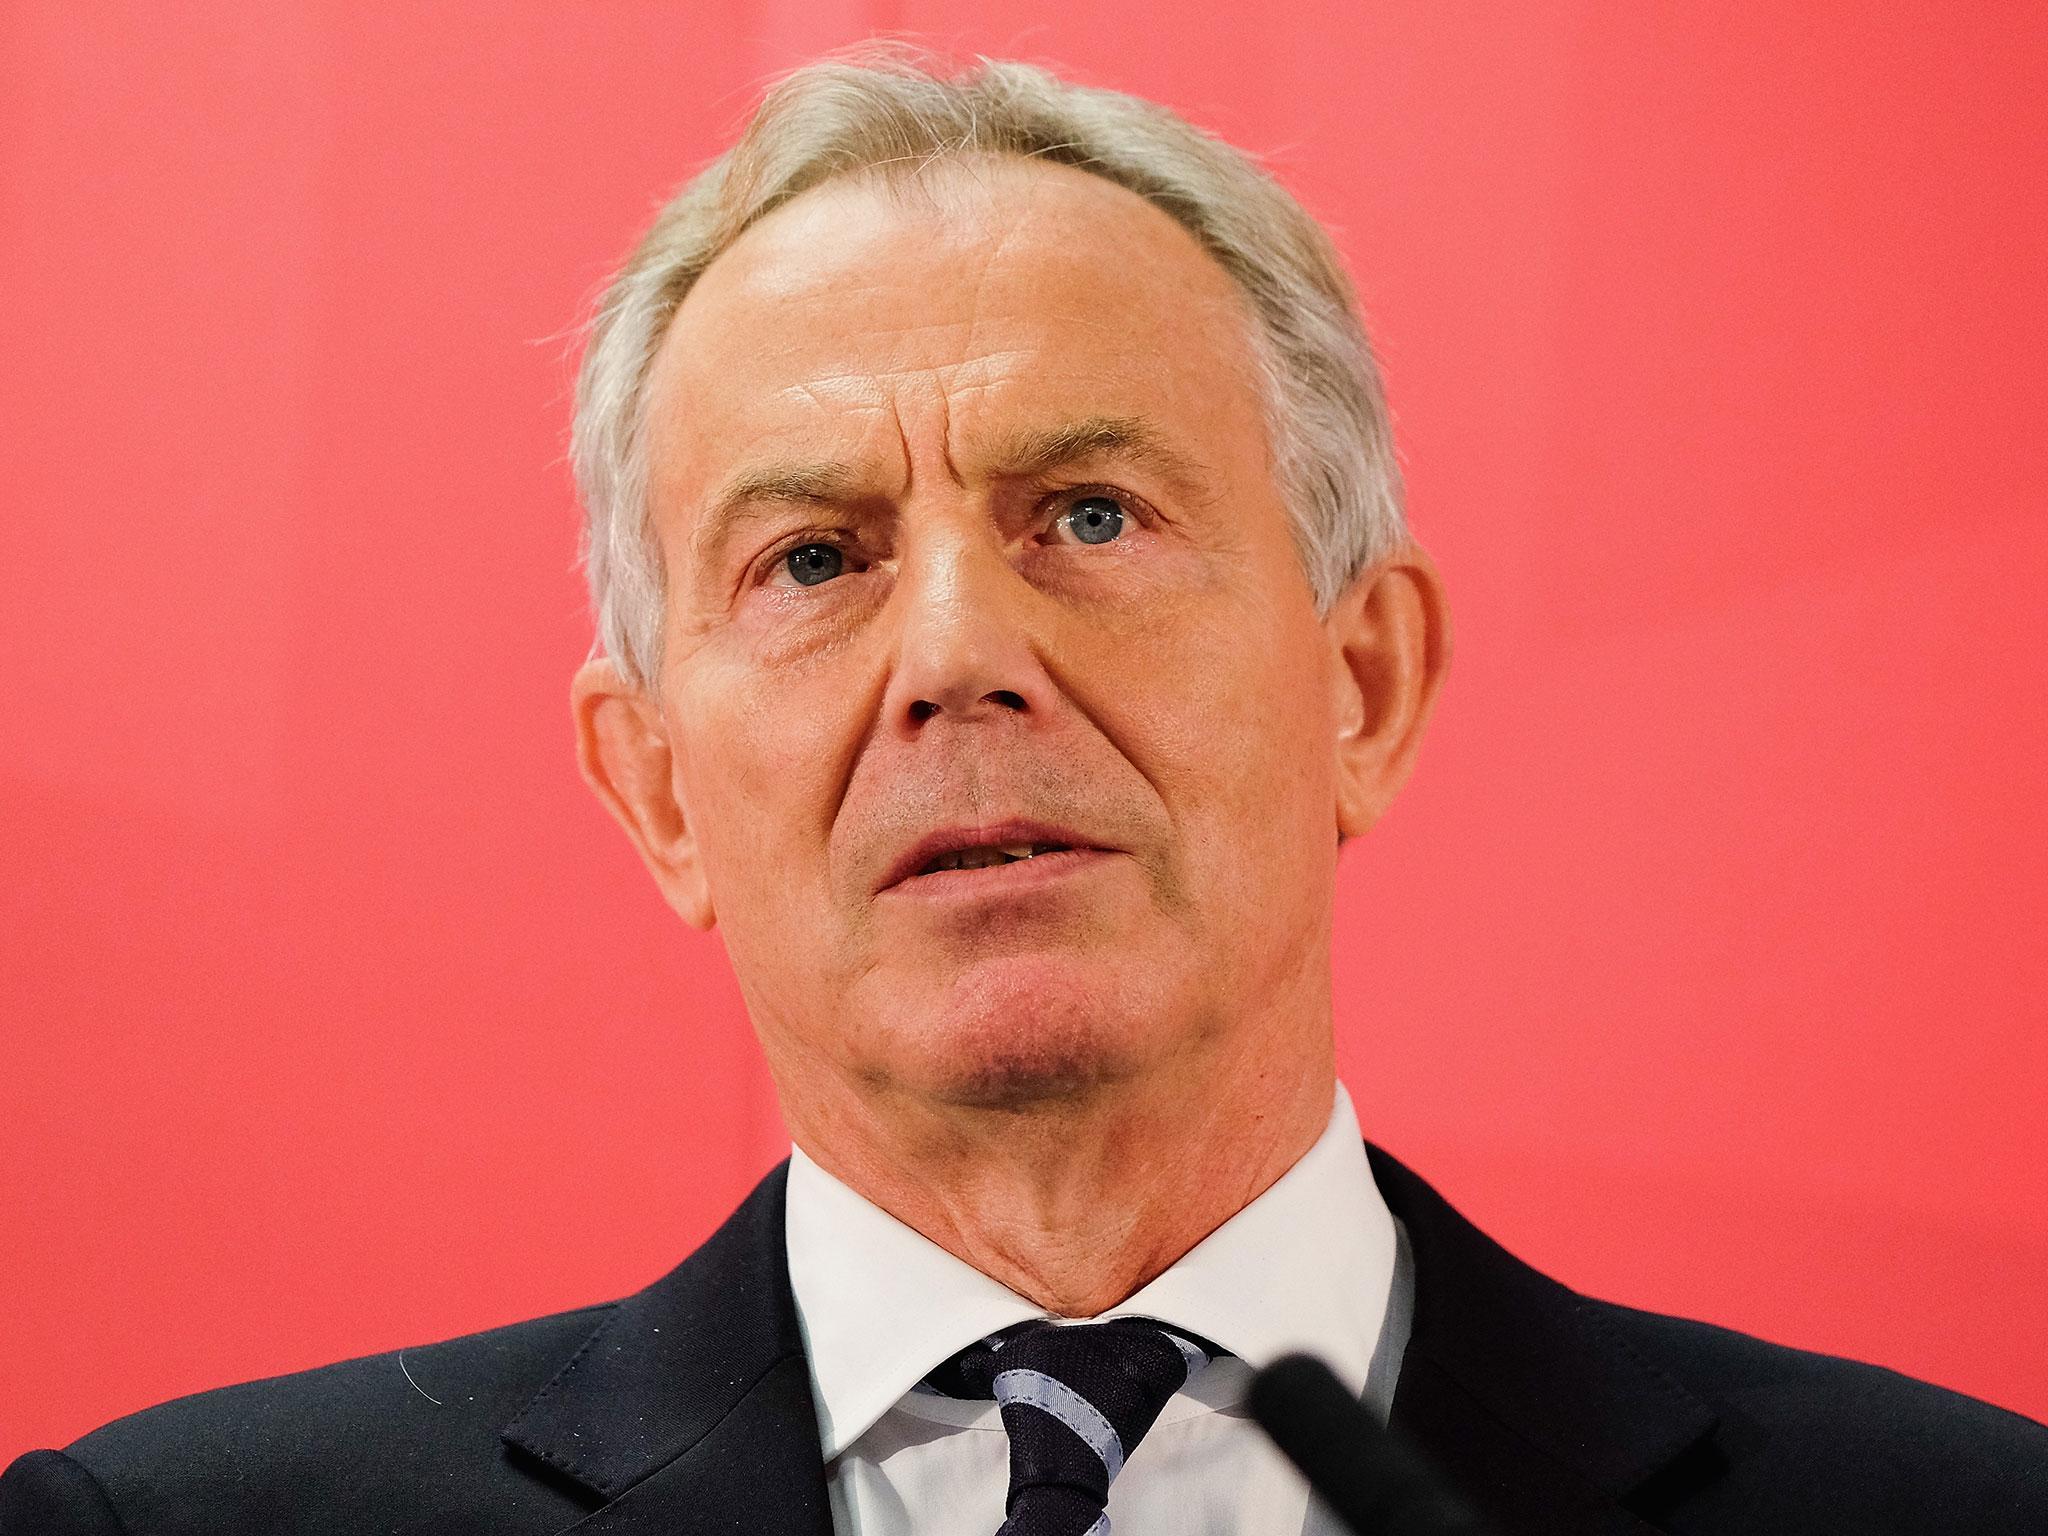 Don't blame Jeremy Corbyn over Labour's lack of vision on Europe, Tony Blair is just as much to blame - The Independent